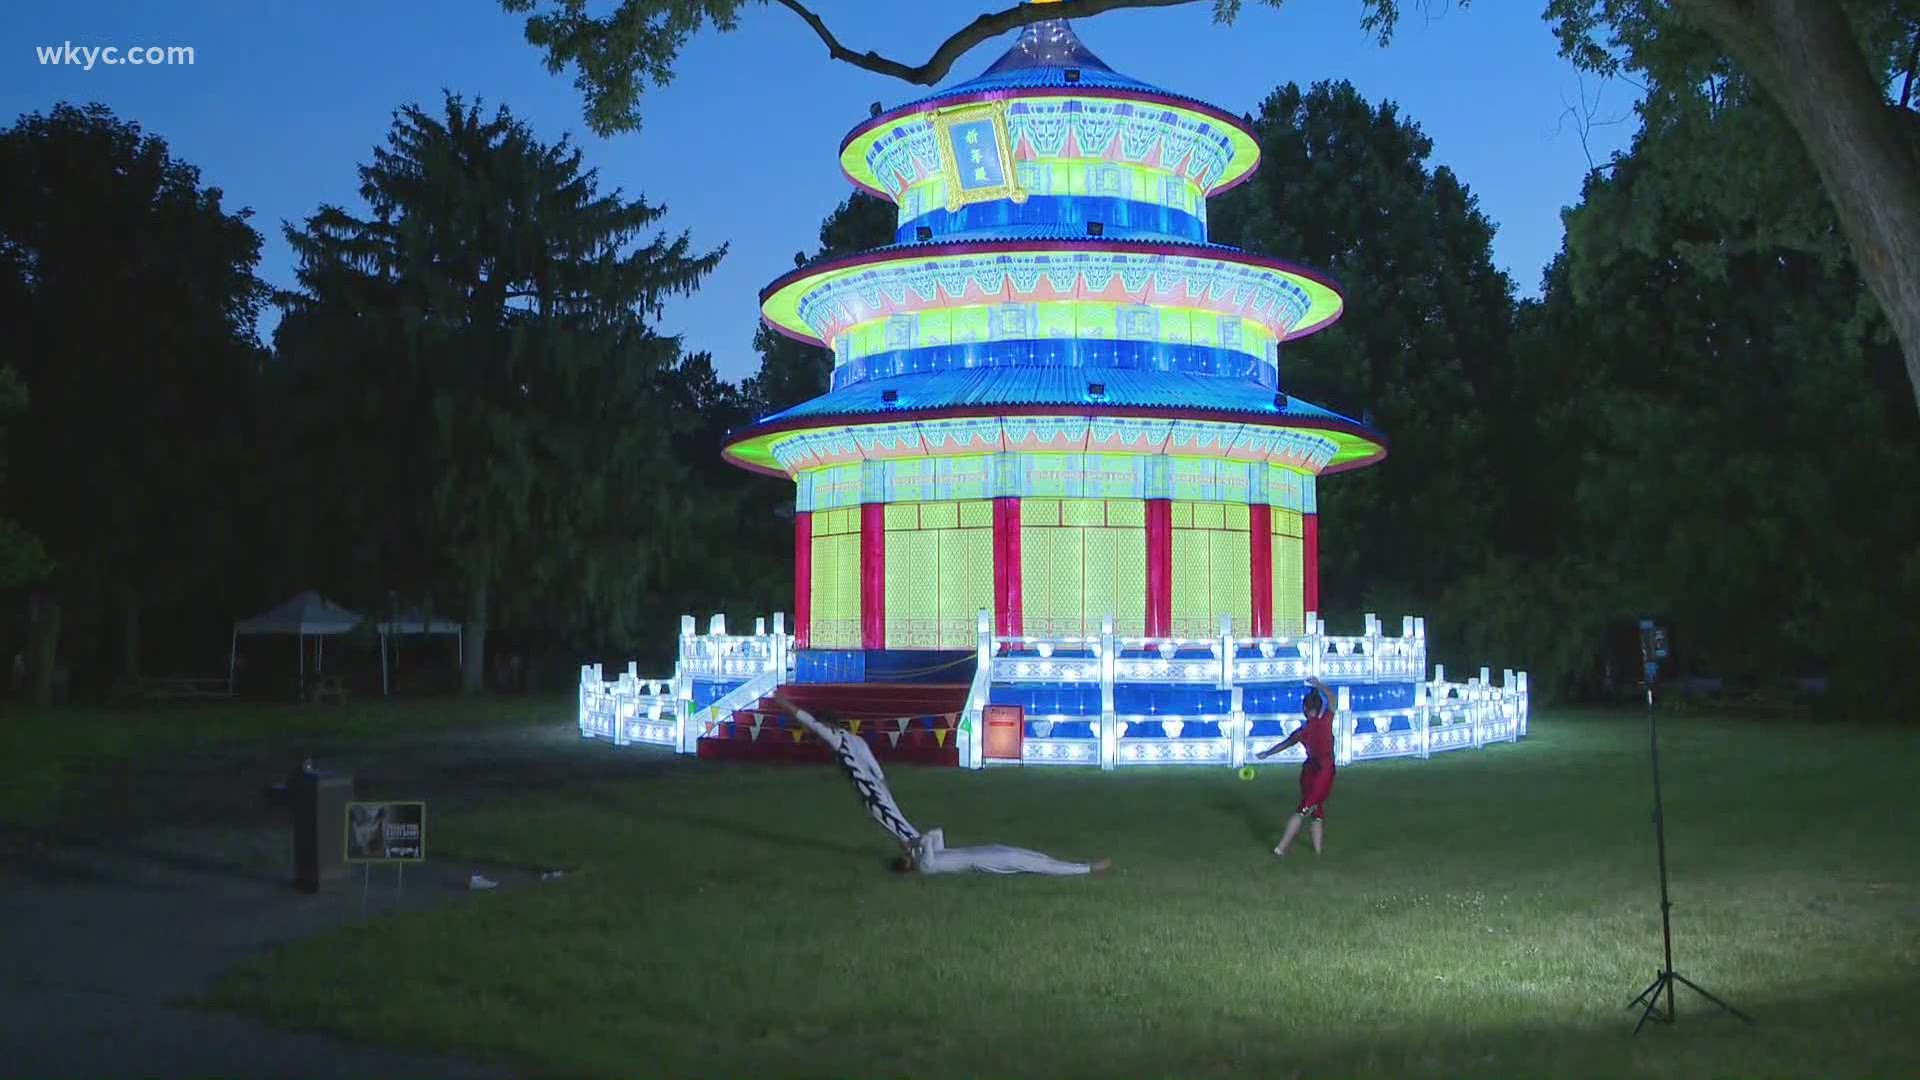 One of the Cleveland Zoo’s most popular attractions is set to return this summer for the third consecutive year. The Asian Lantern Festival runs July 9 to Aug. 23.